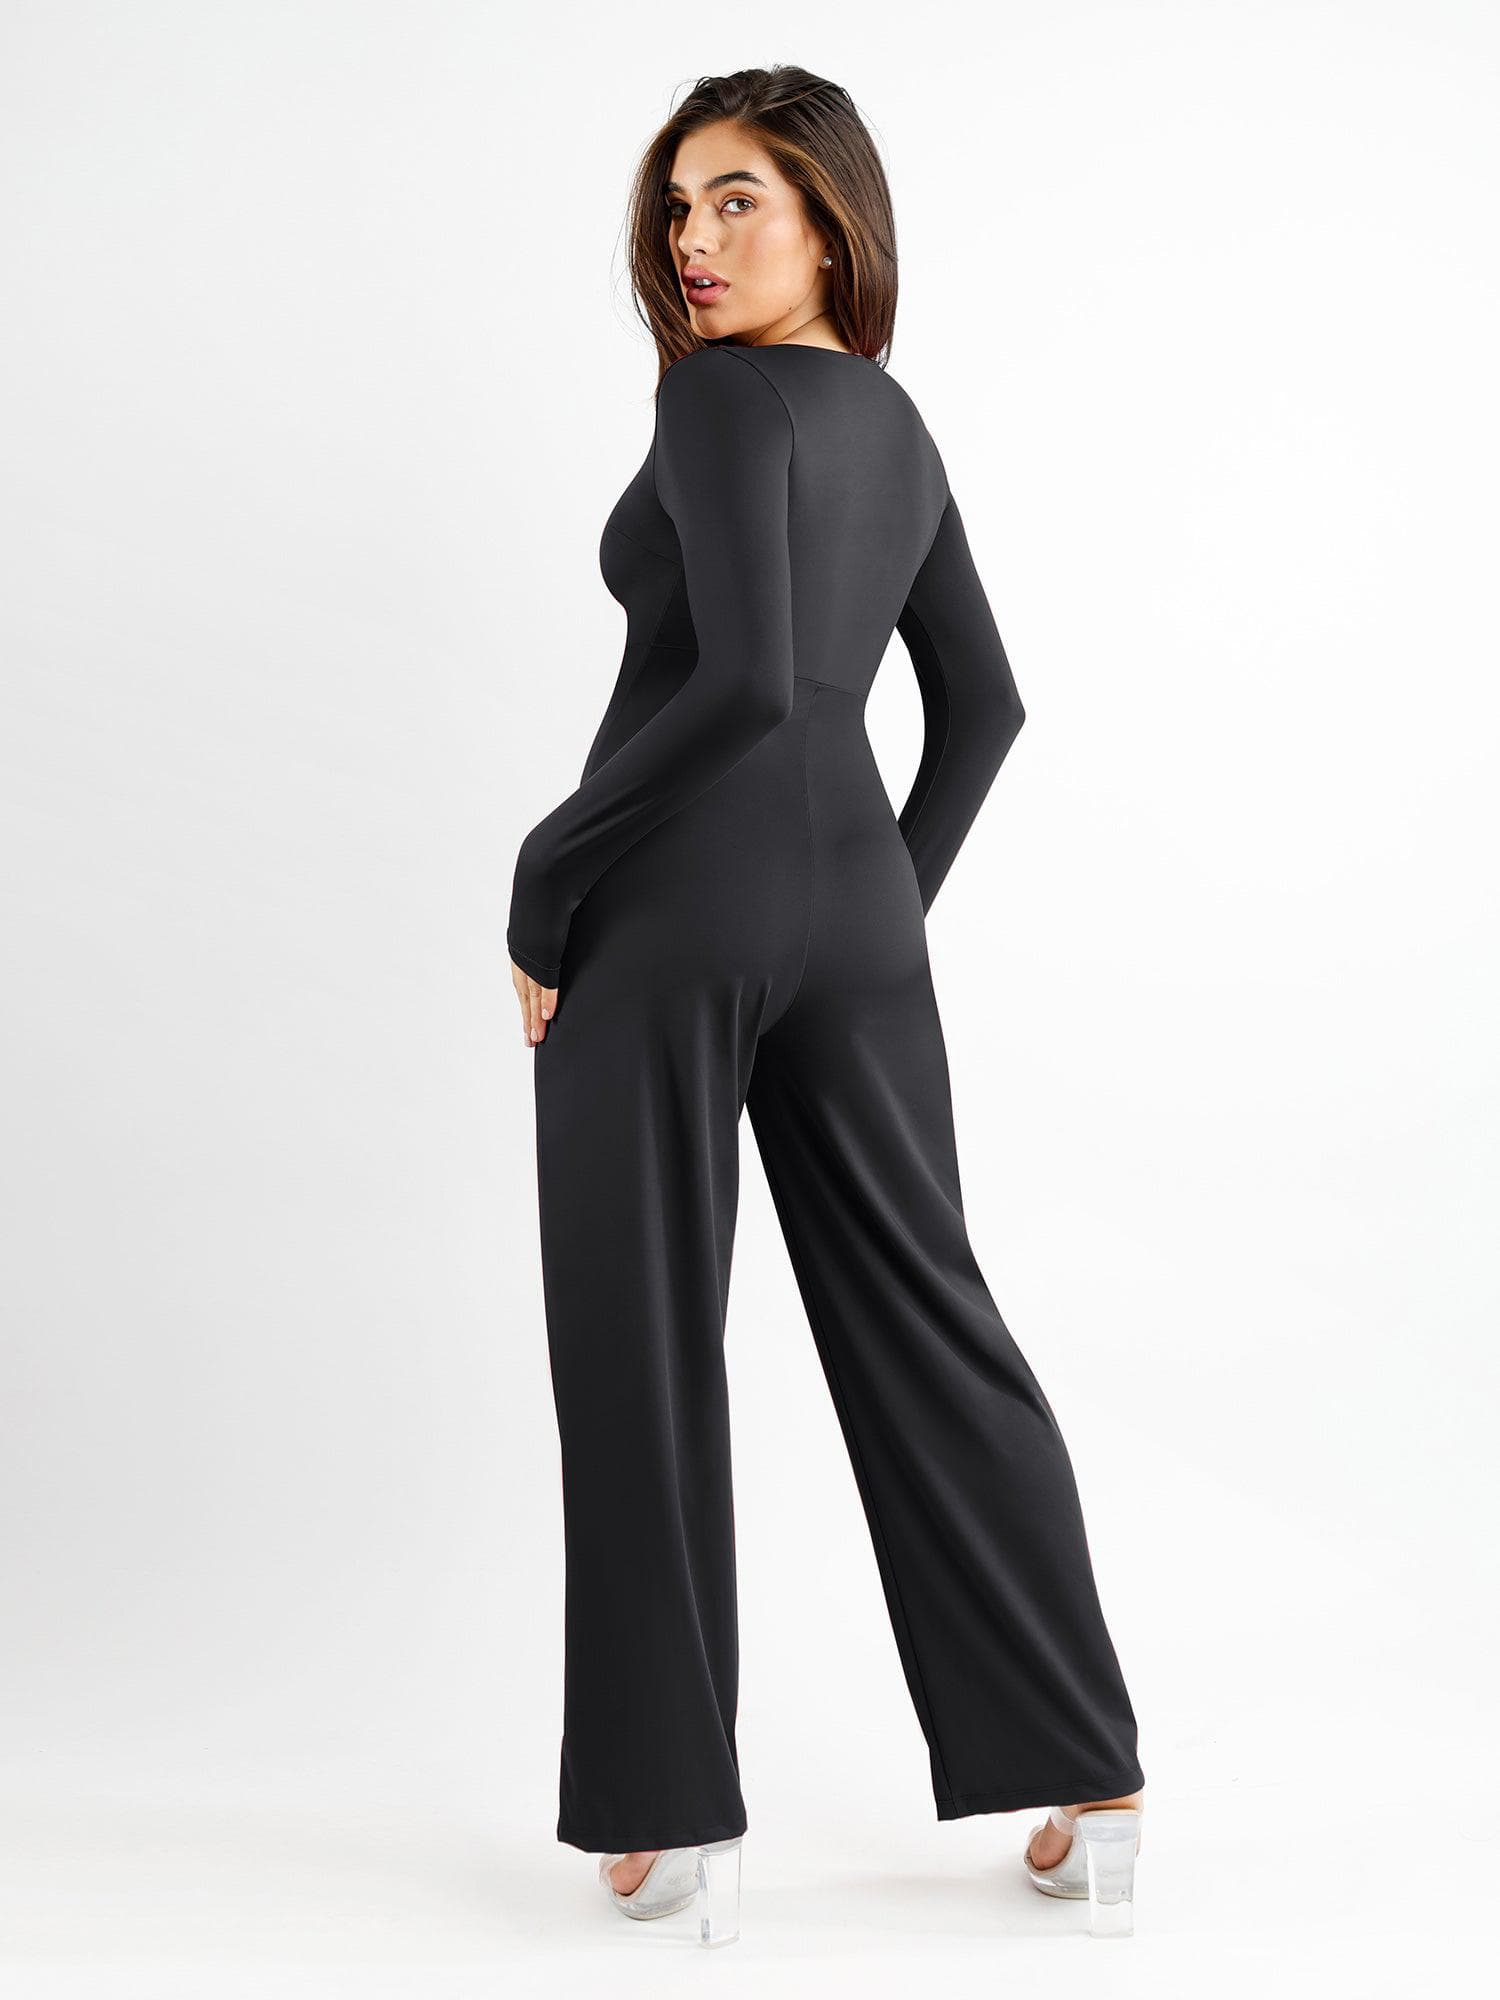 Womens One Piece Square Neck Long Sleeve Wide Leg Pants Rompers